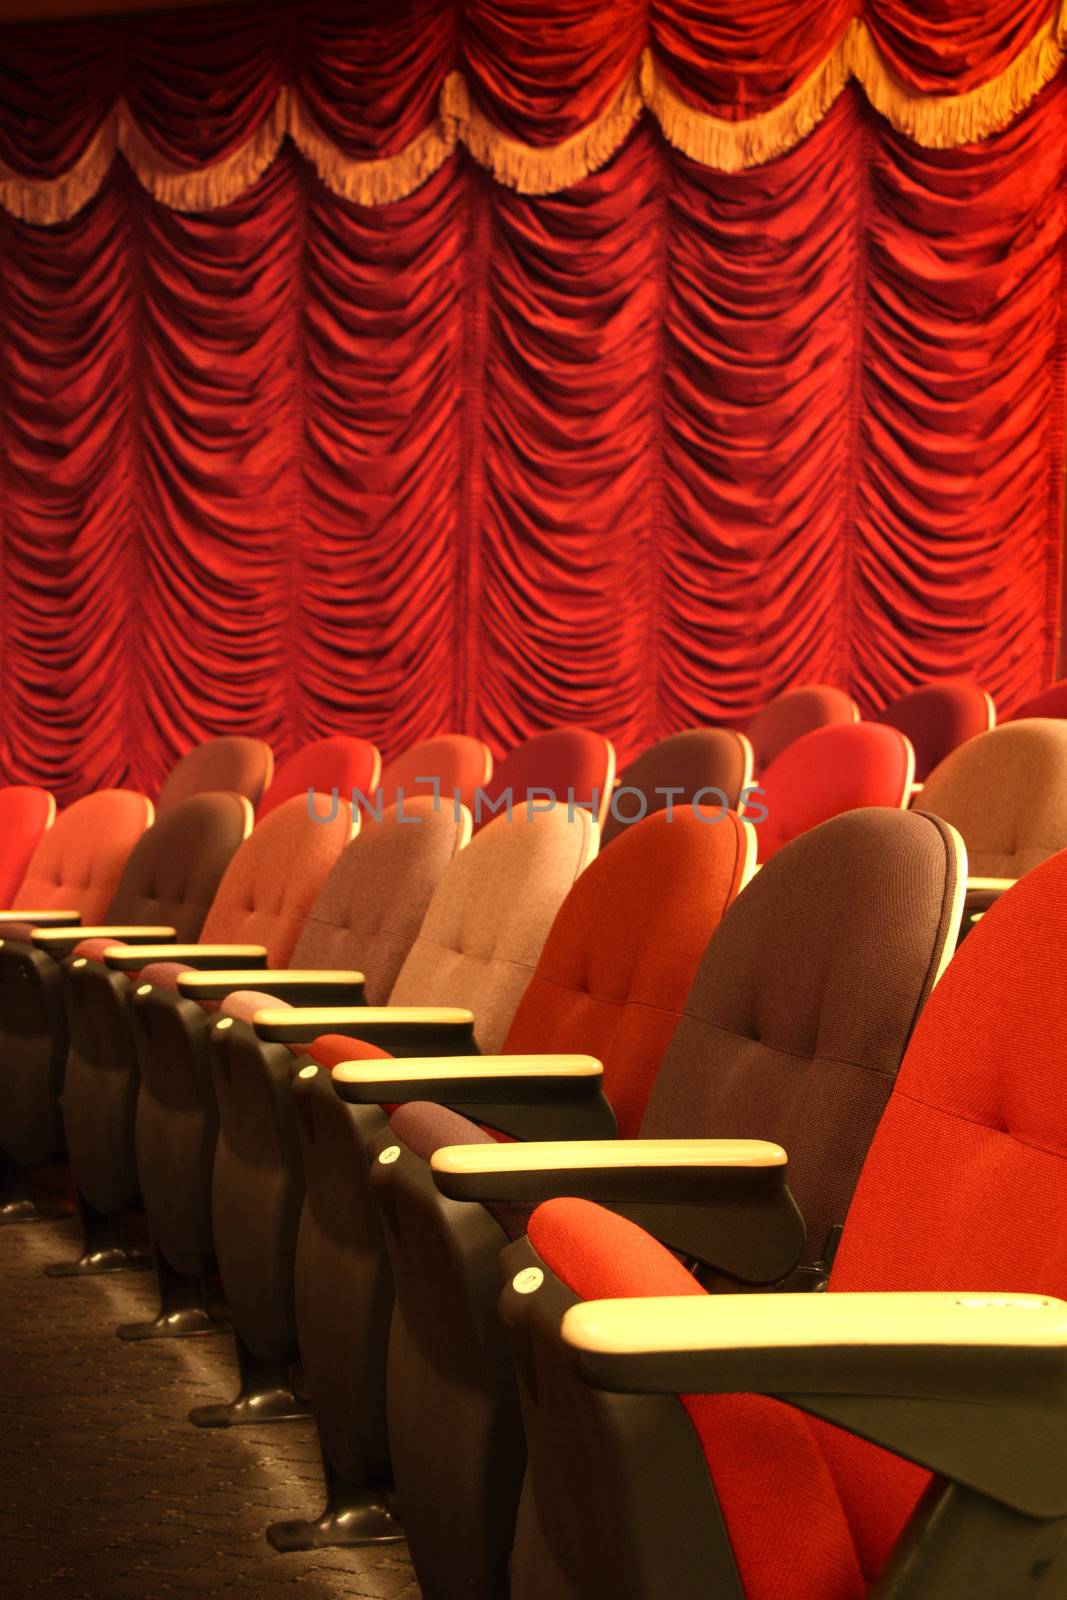 Theater seatings by photosoup